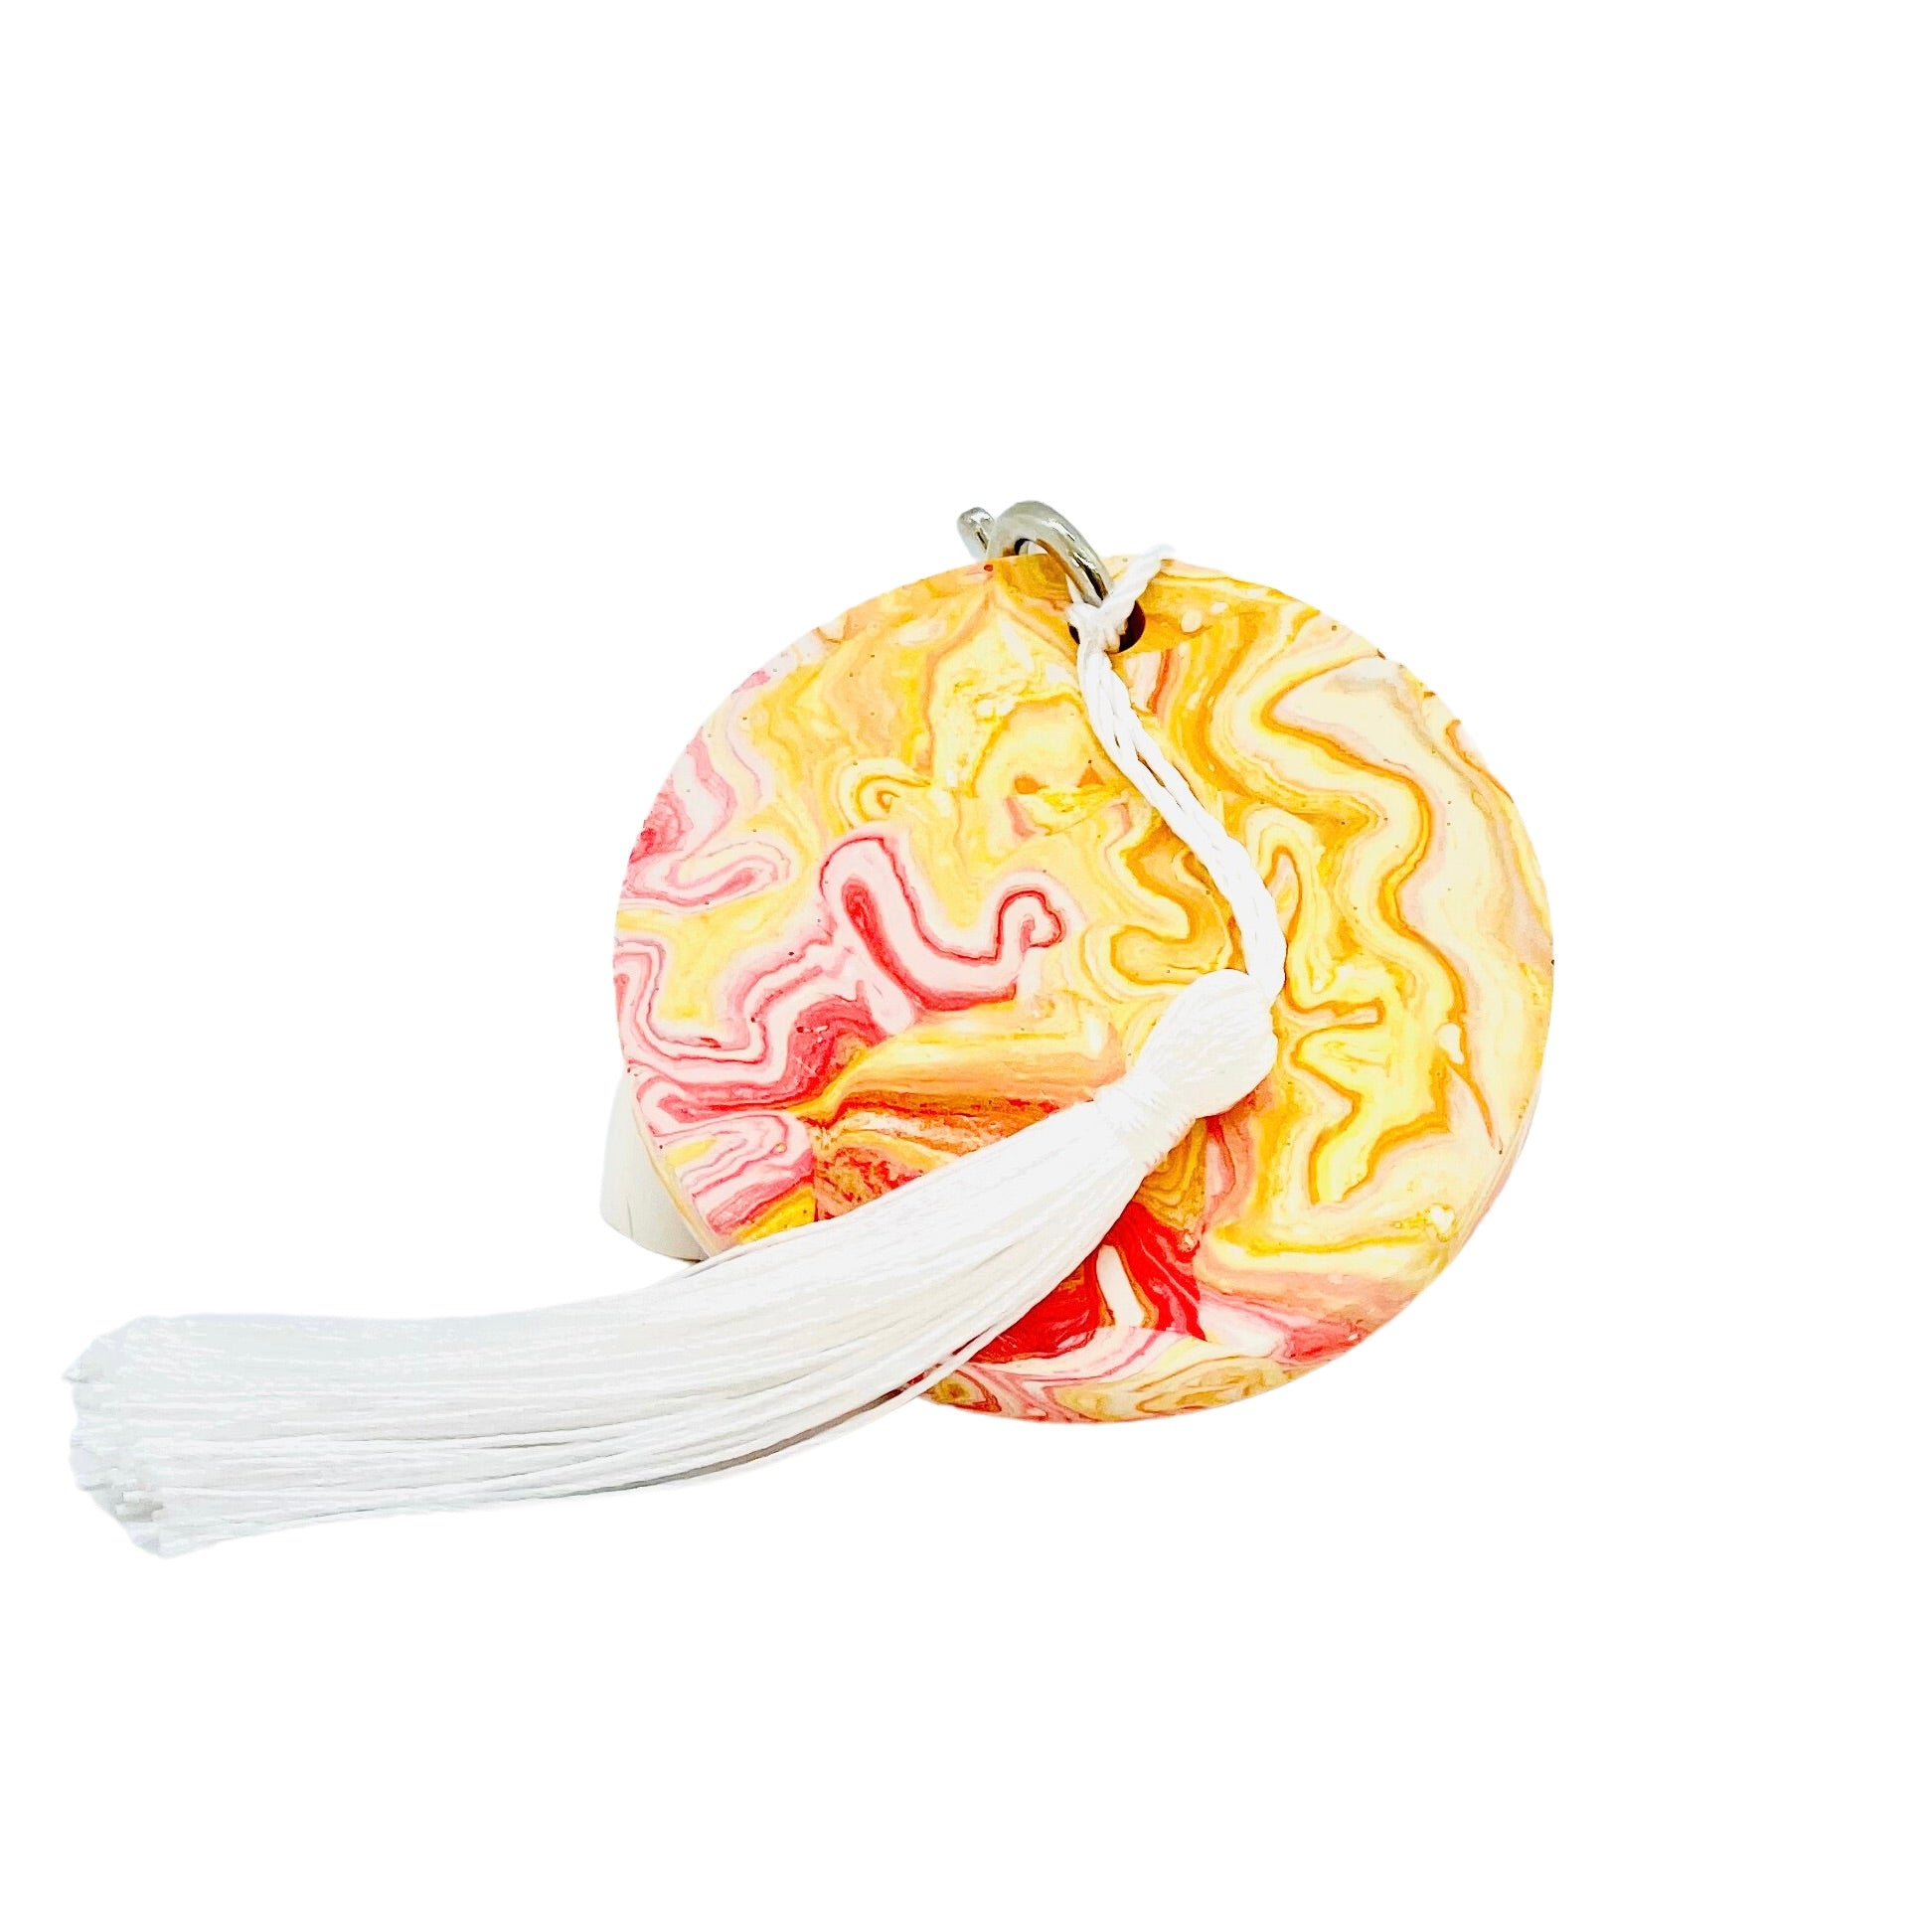 A round Jesmonite disc keyring measuring 6cm in diameter marbled with red and orange pigment.